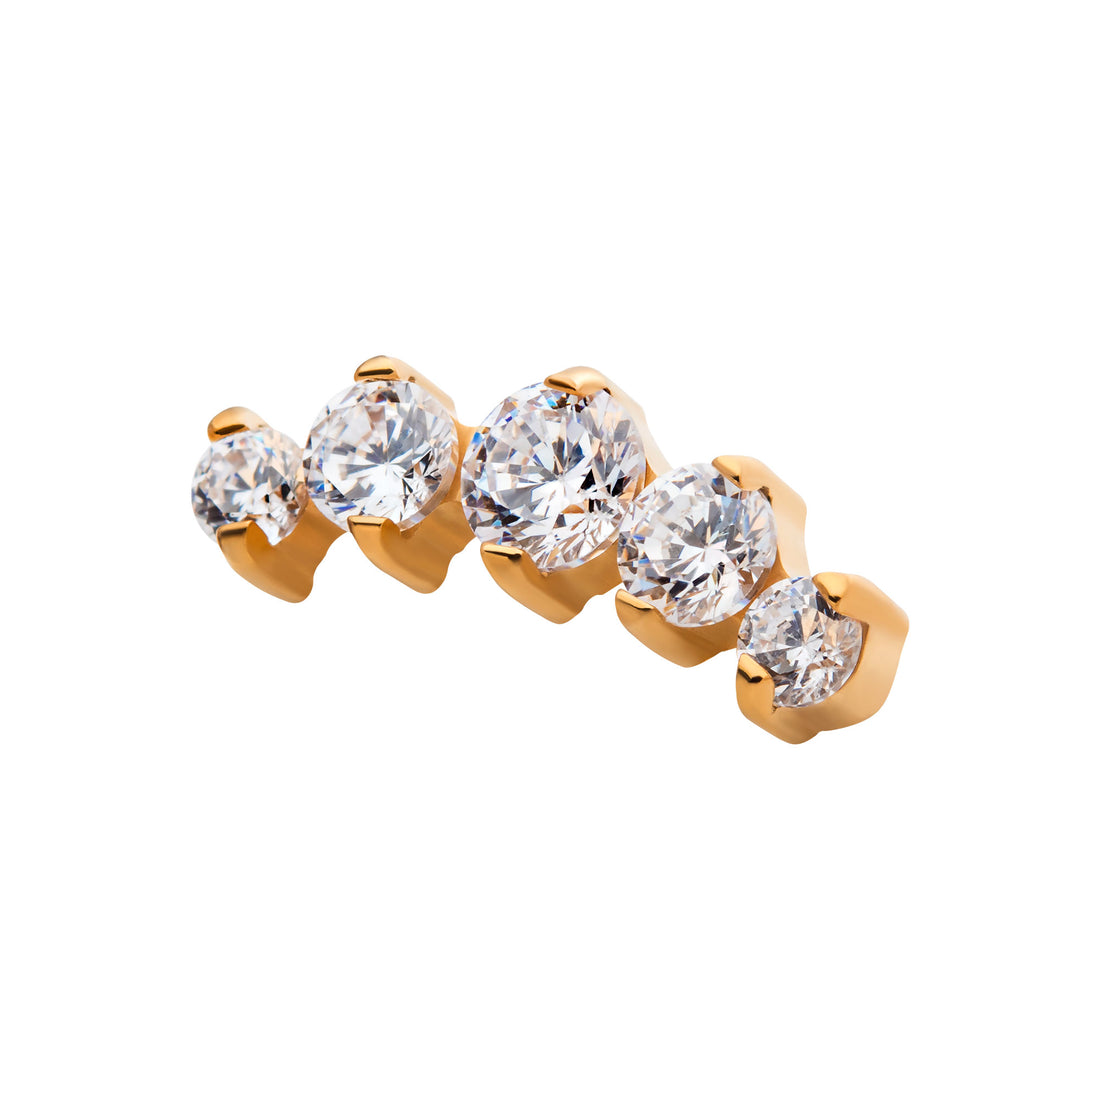 24KT Gold PVD Titanium Internally Threaded with Prong Set Clear CZ 5-Cluster Top